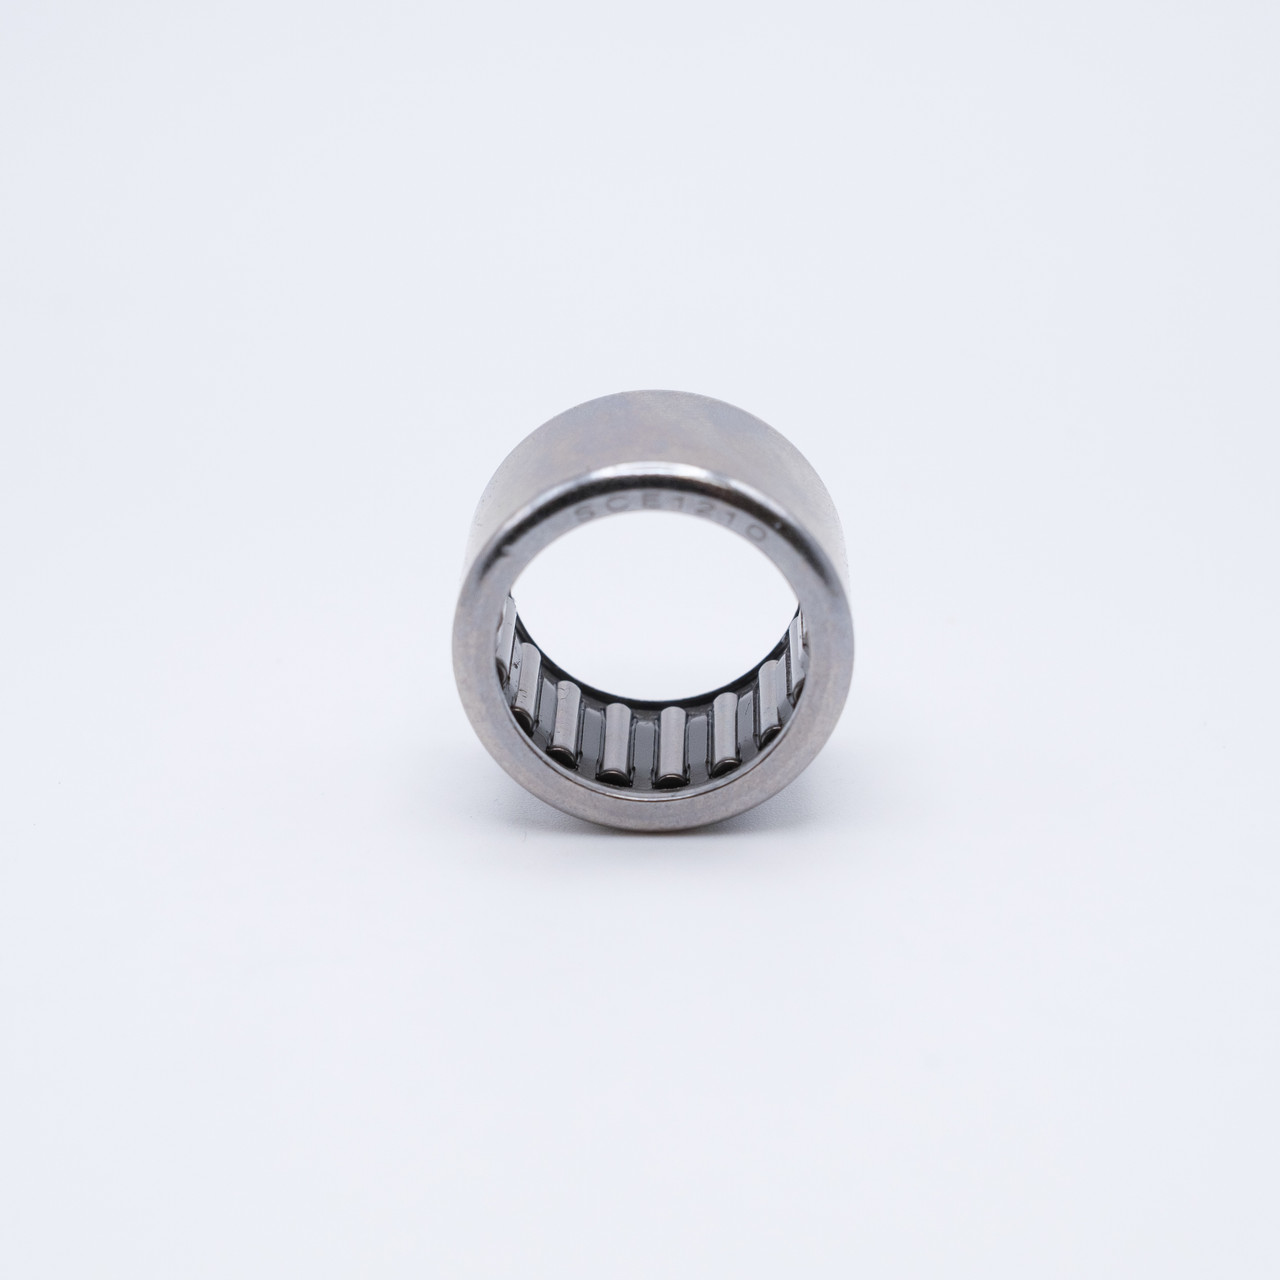 J1616 Needle Roller Bearing 1x1-1/4x1 Front View